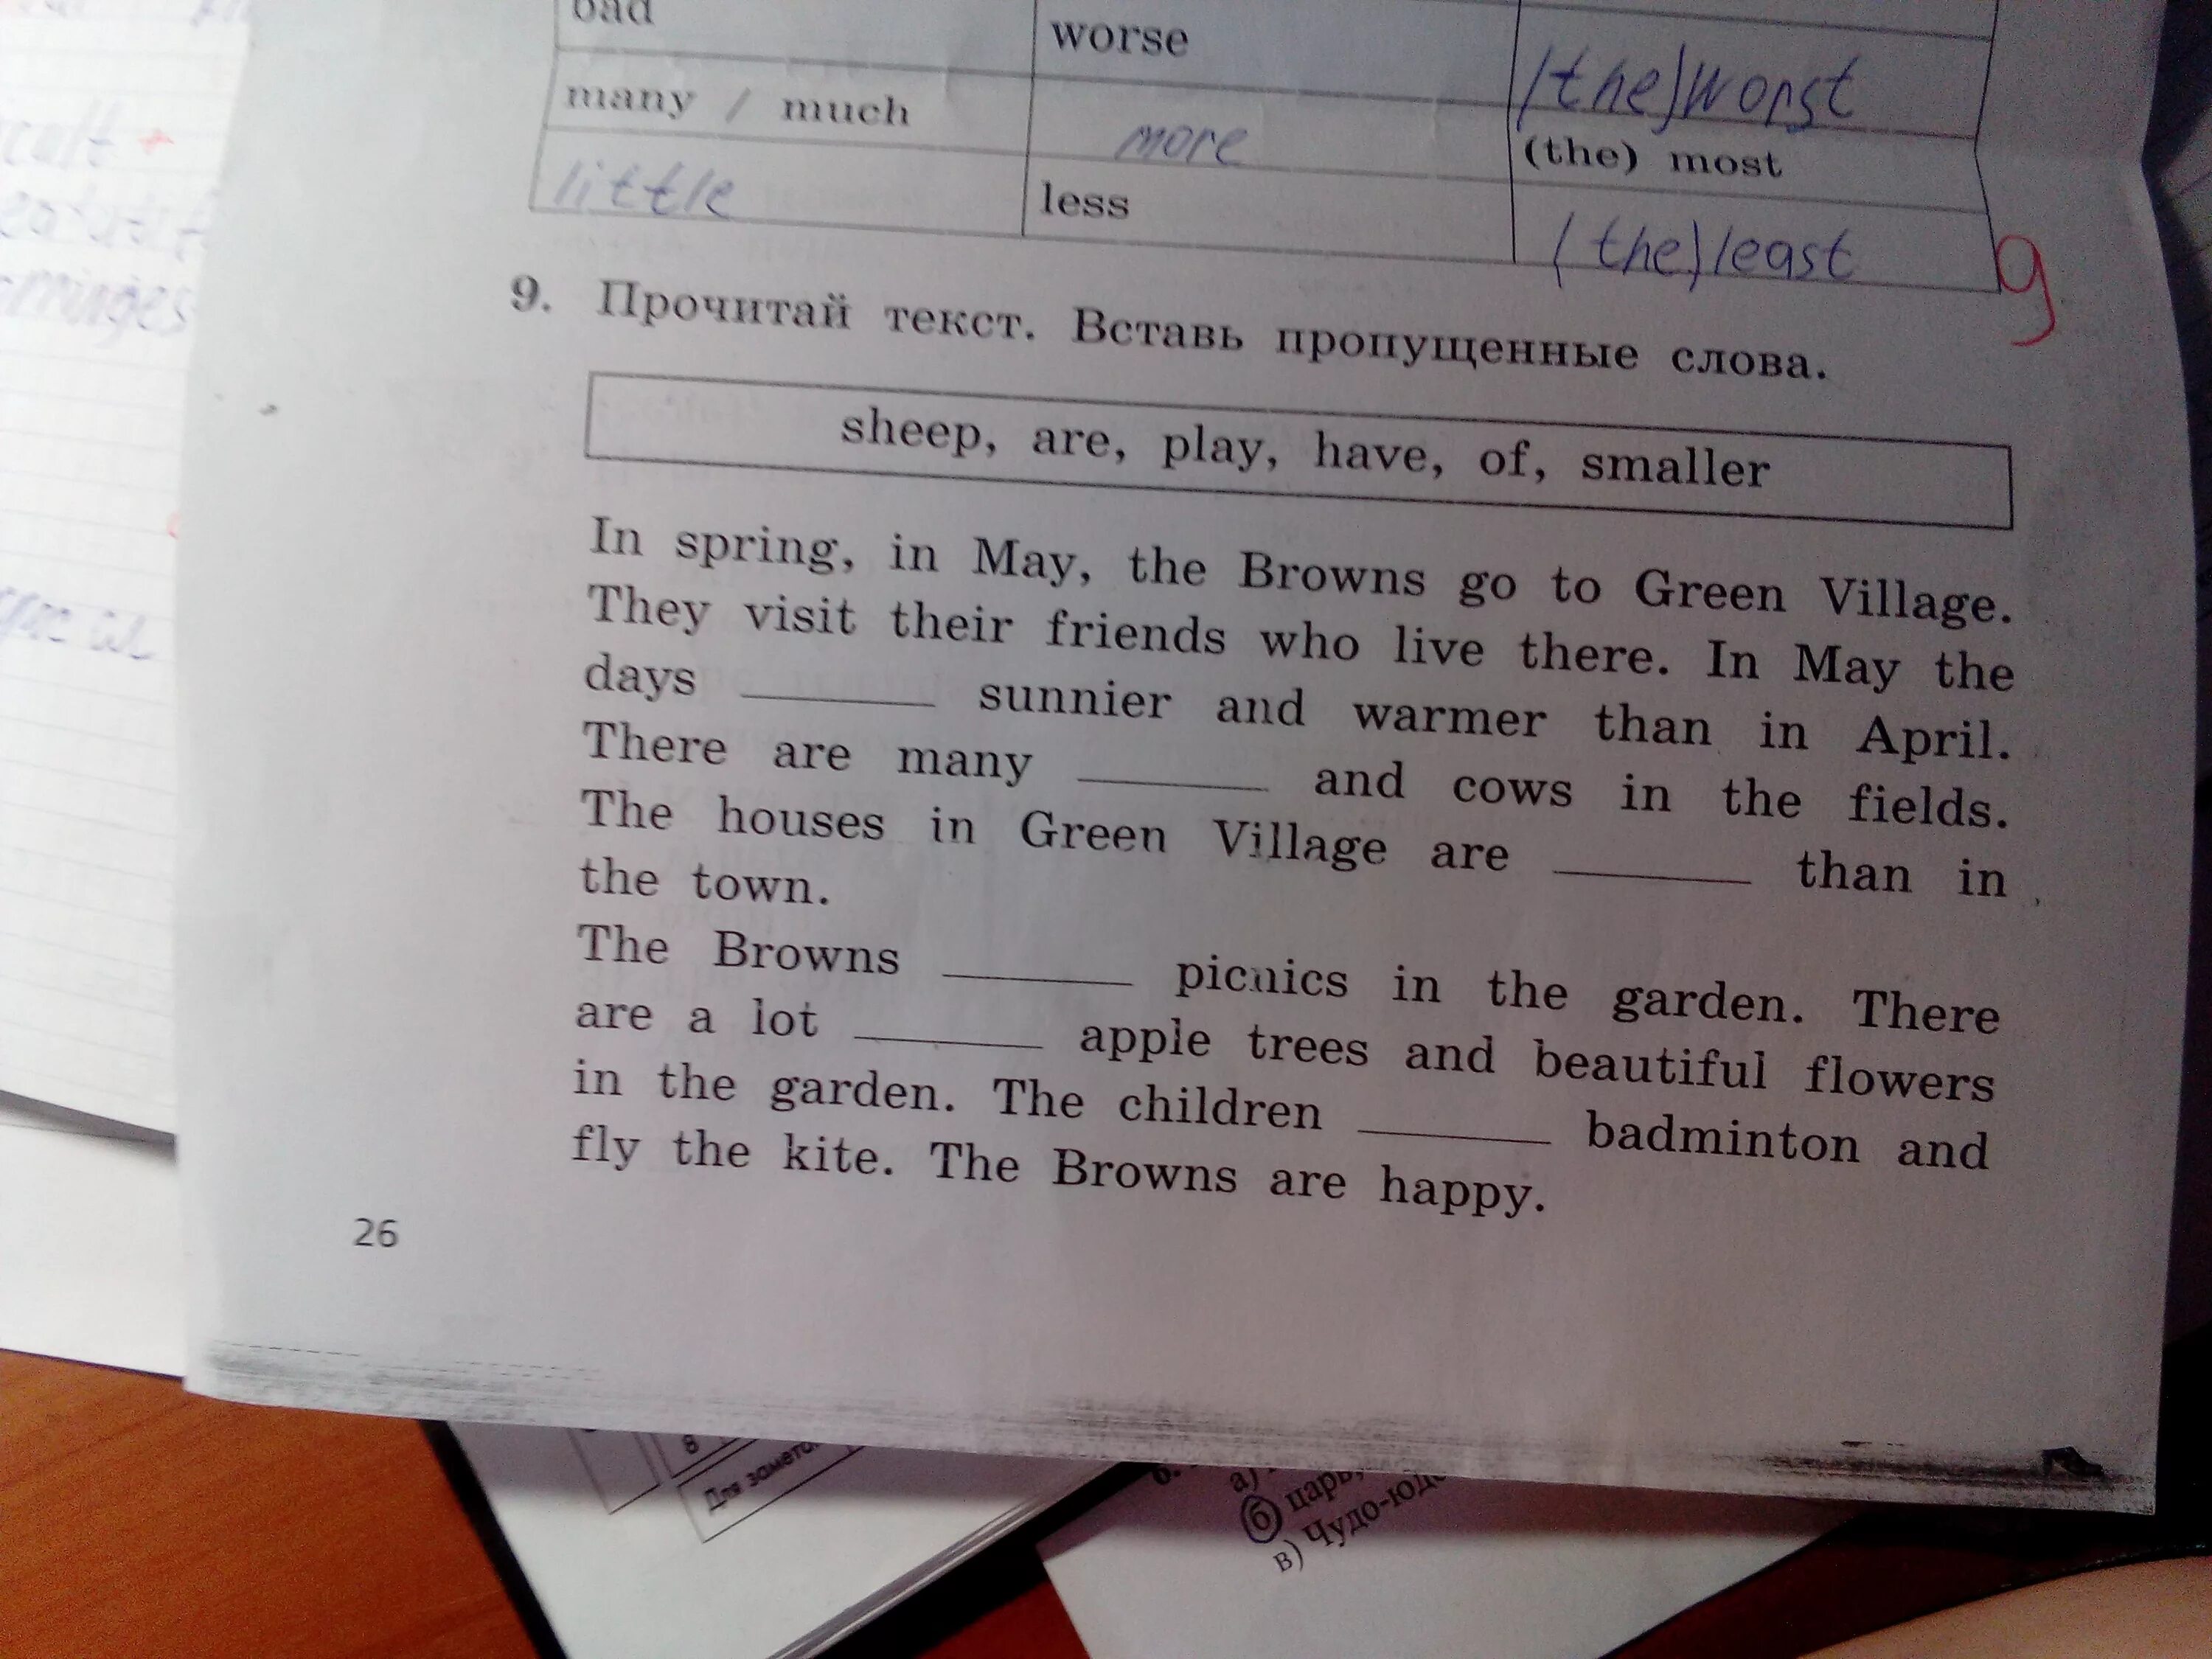 Заполните недостающие слова. In Spring in May the Browns go to Green Village вставить пропущенные слова. Прочитай текст вставь пропущенные слова. Вставьте пропущенные слова was were. Вставьте пропущенные слова is and are and was and were.